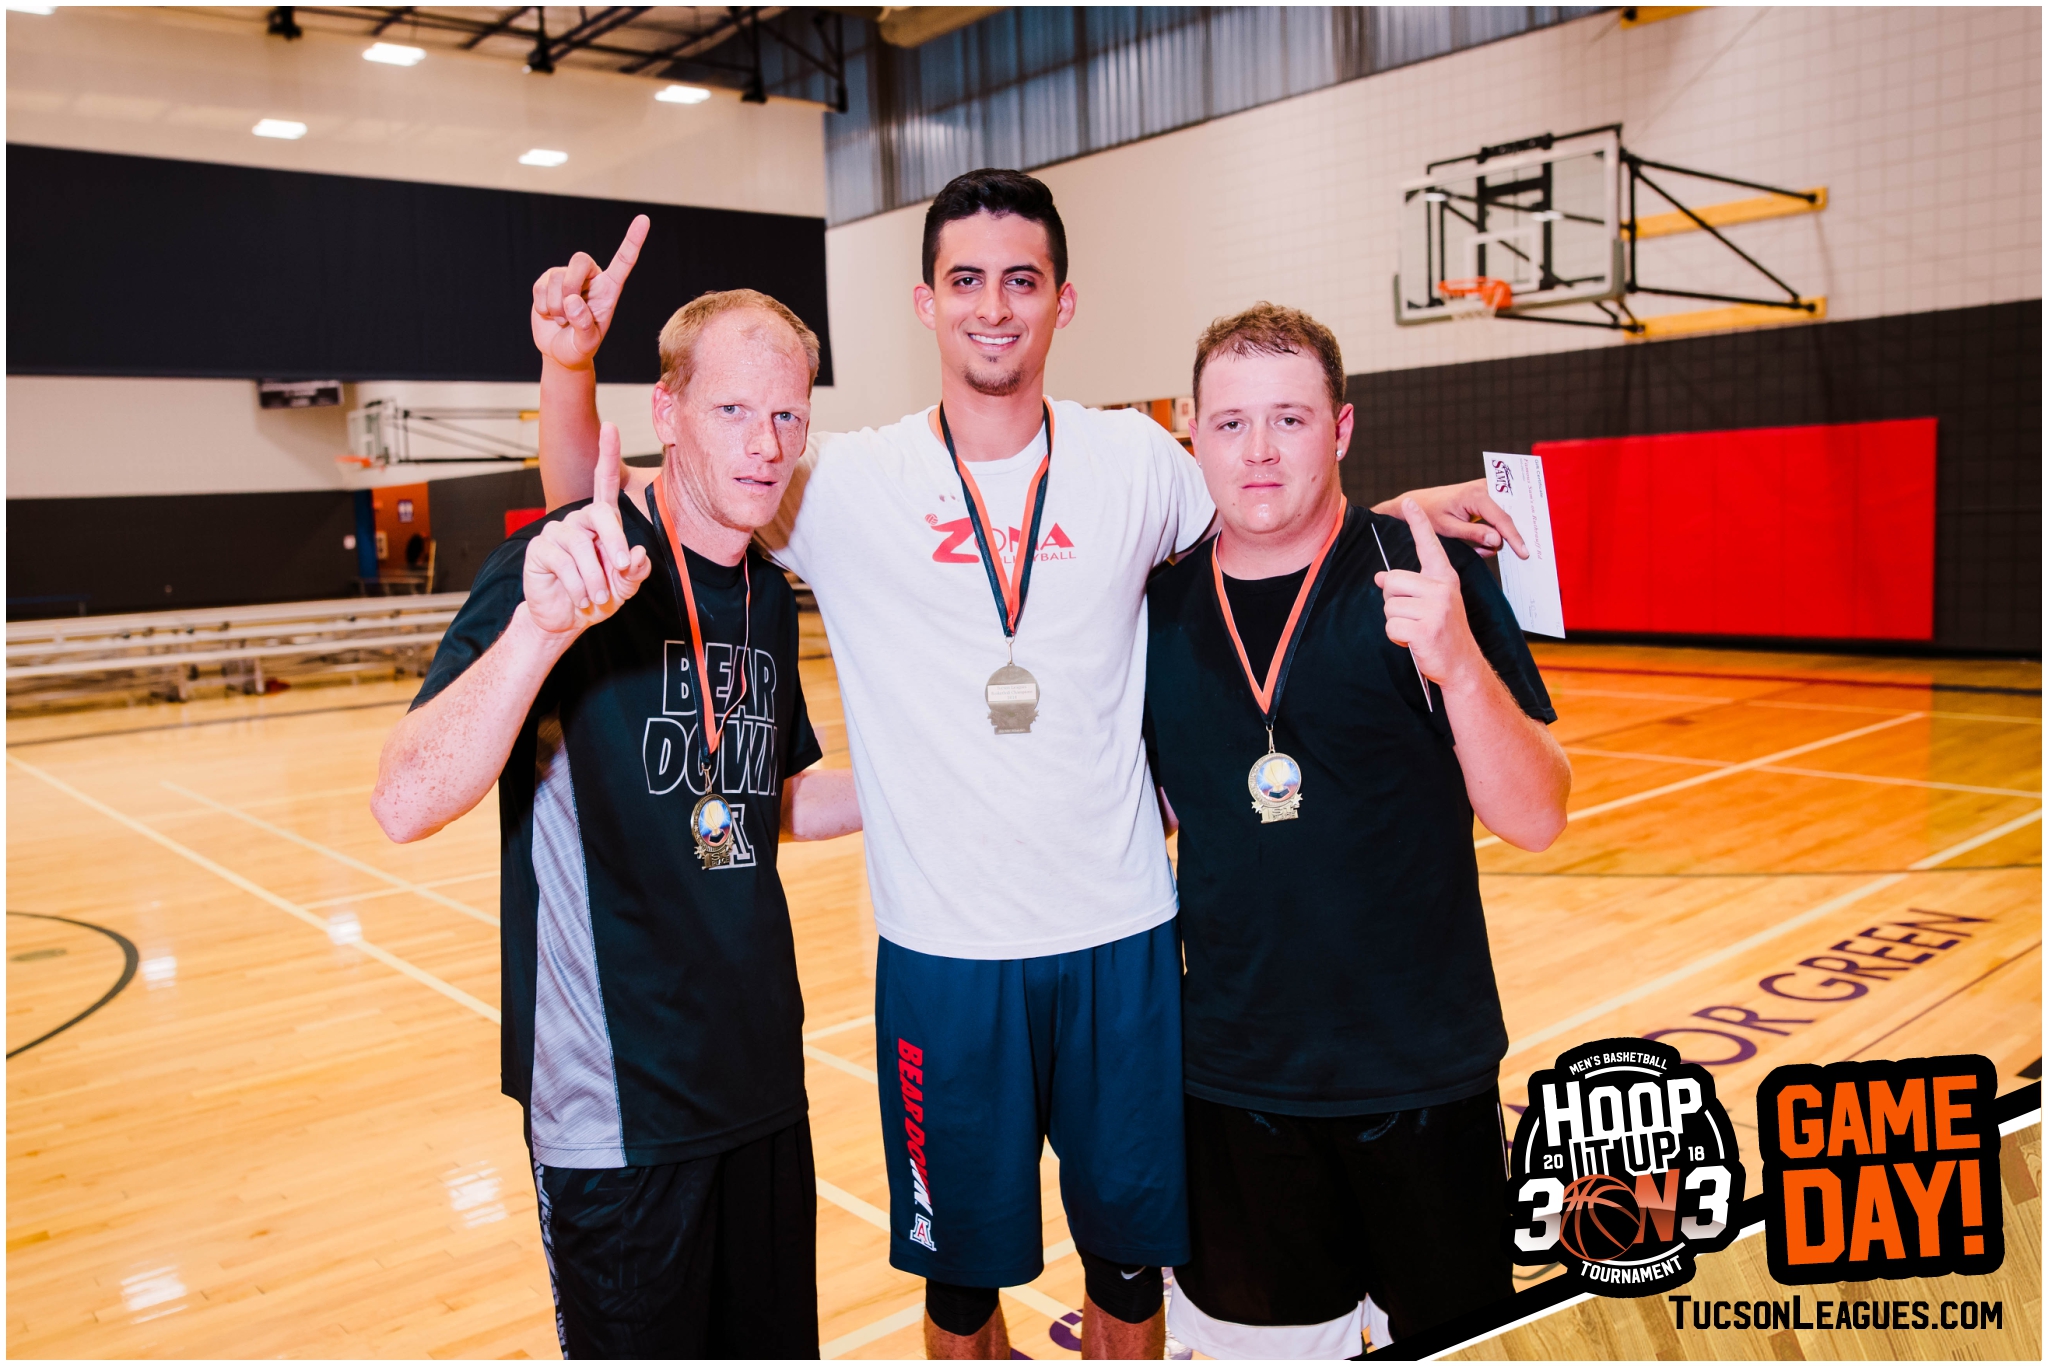 Mar 10th Hoop it Up 3 on 3 Men's Basketball Tournament Champions